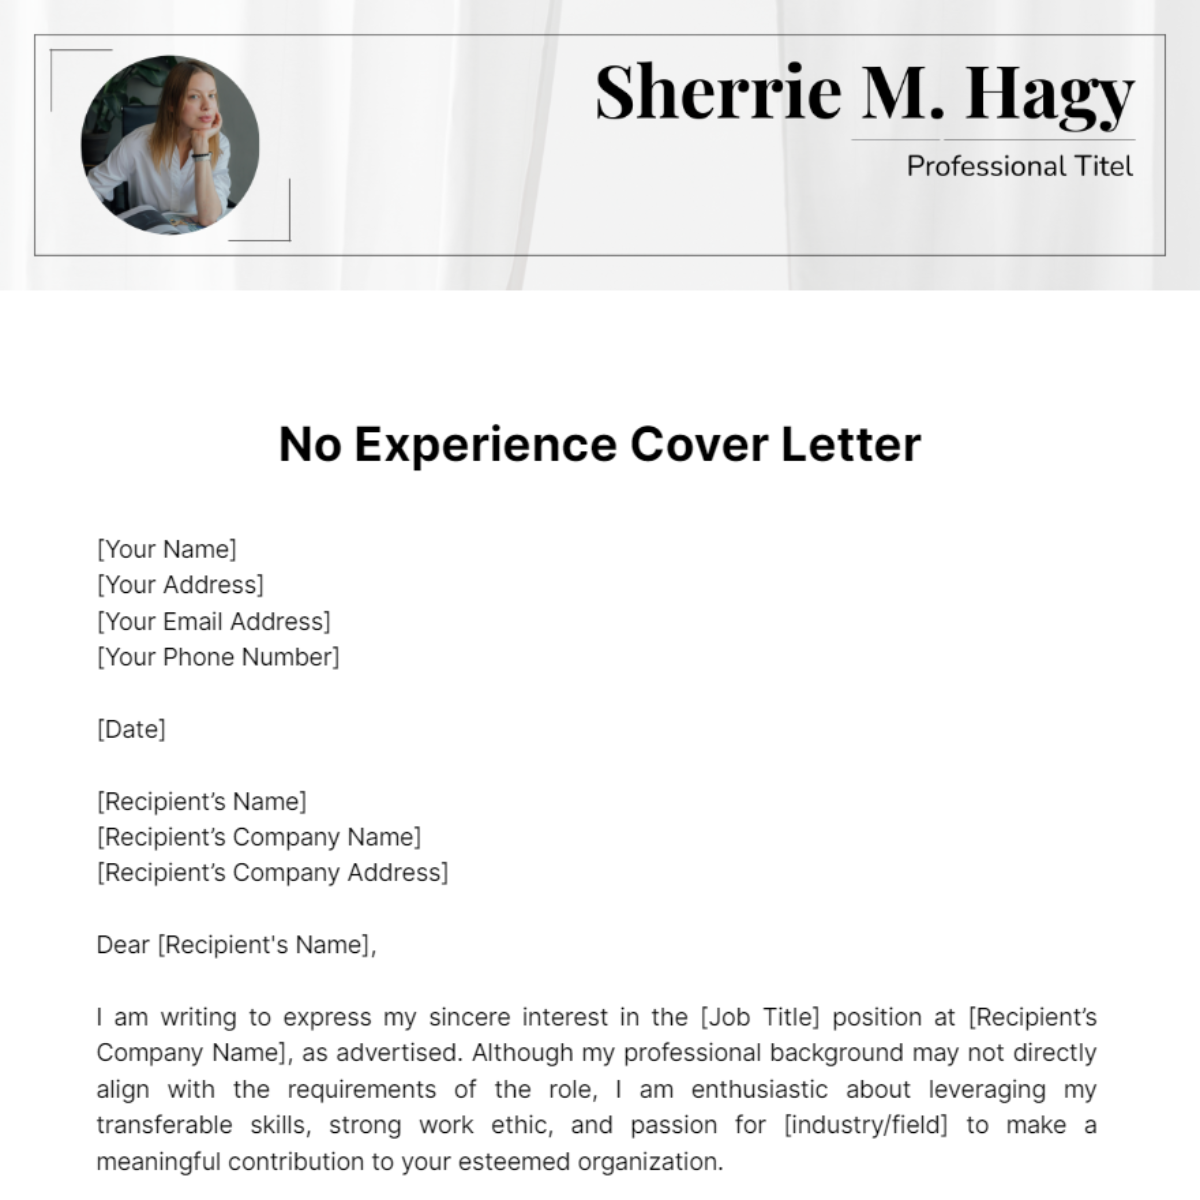 No Experience Cover Letter Template